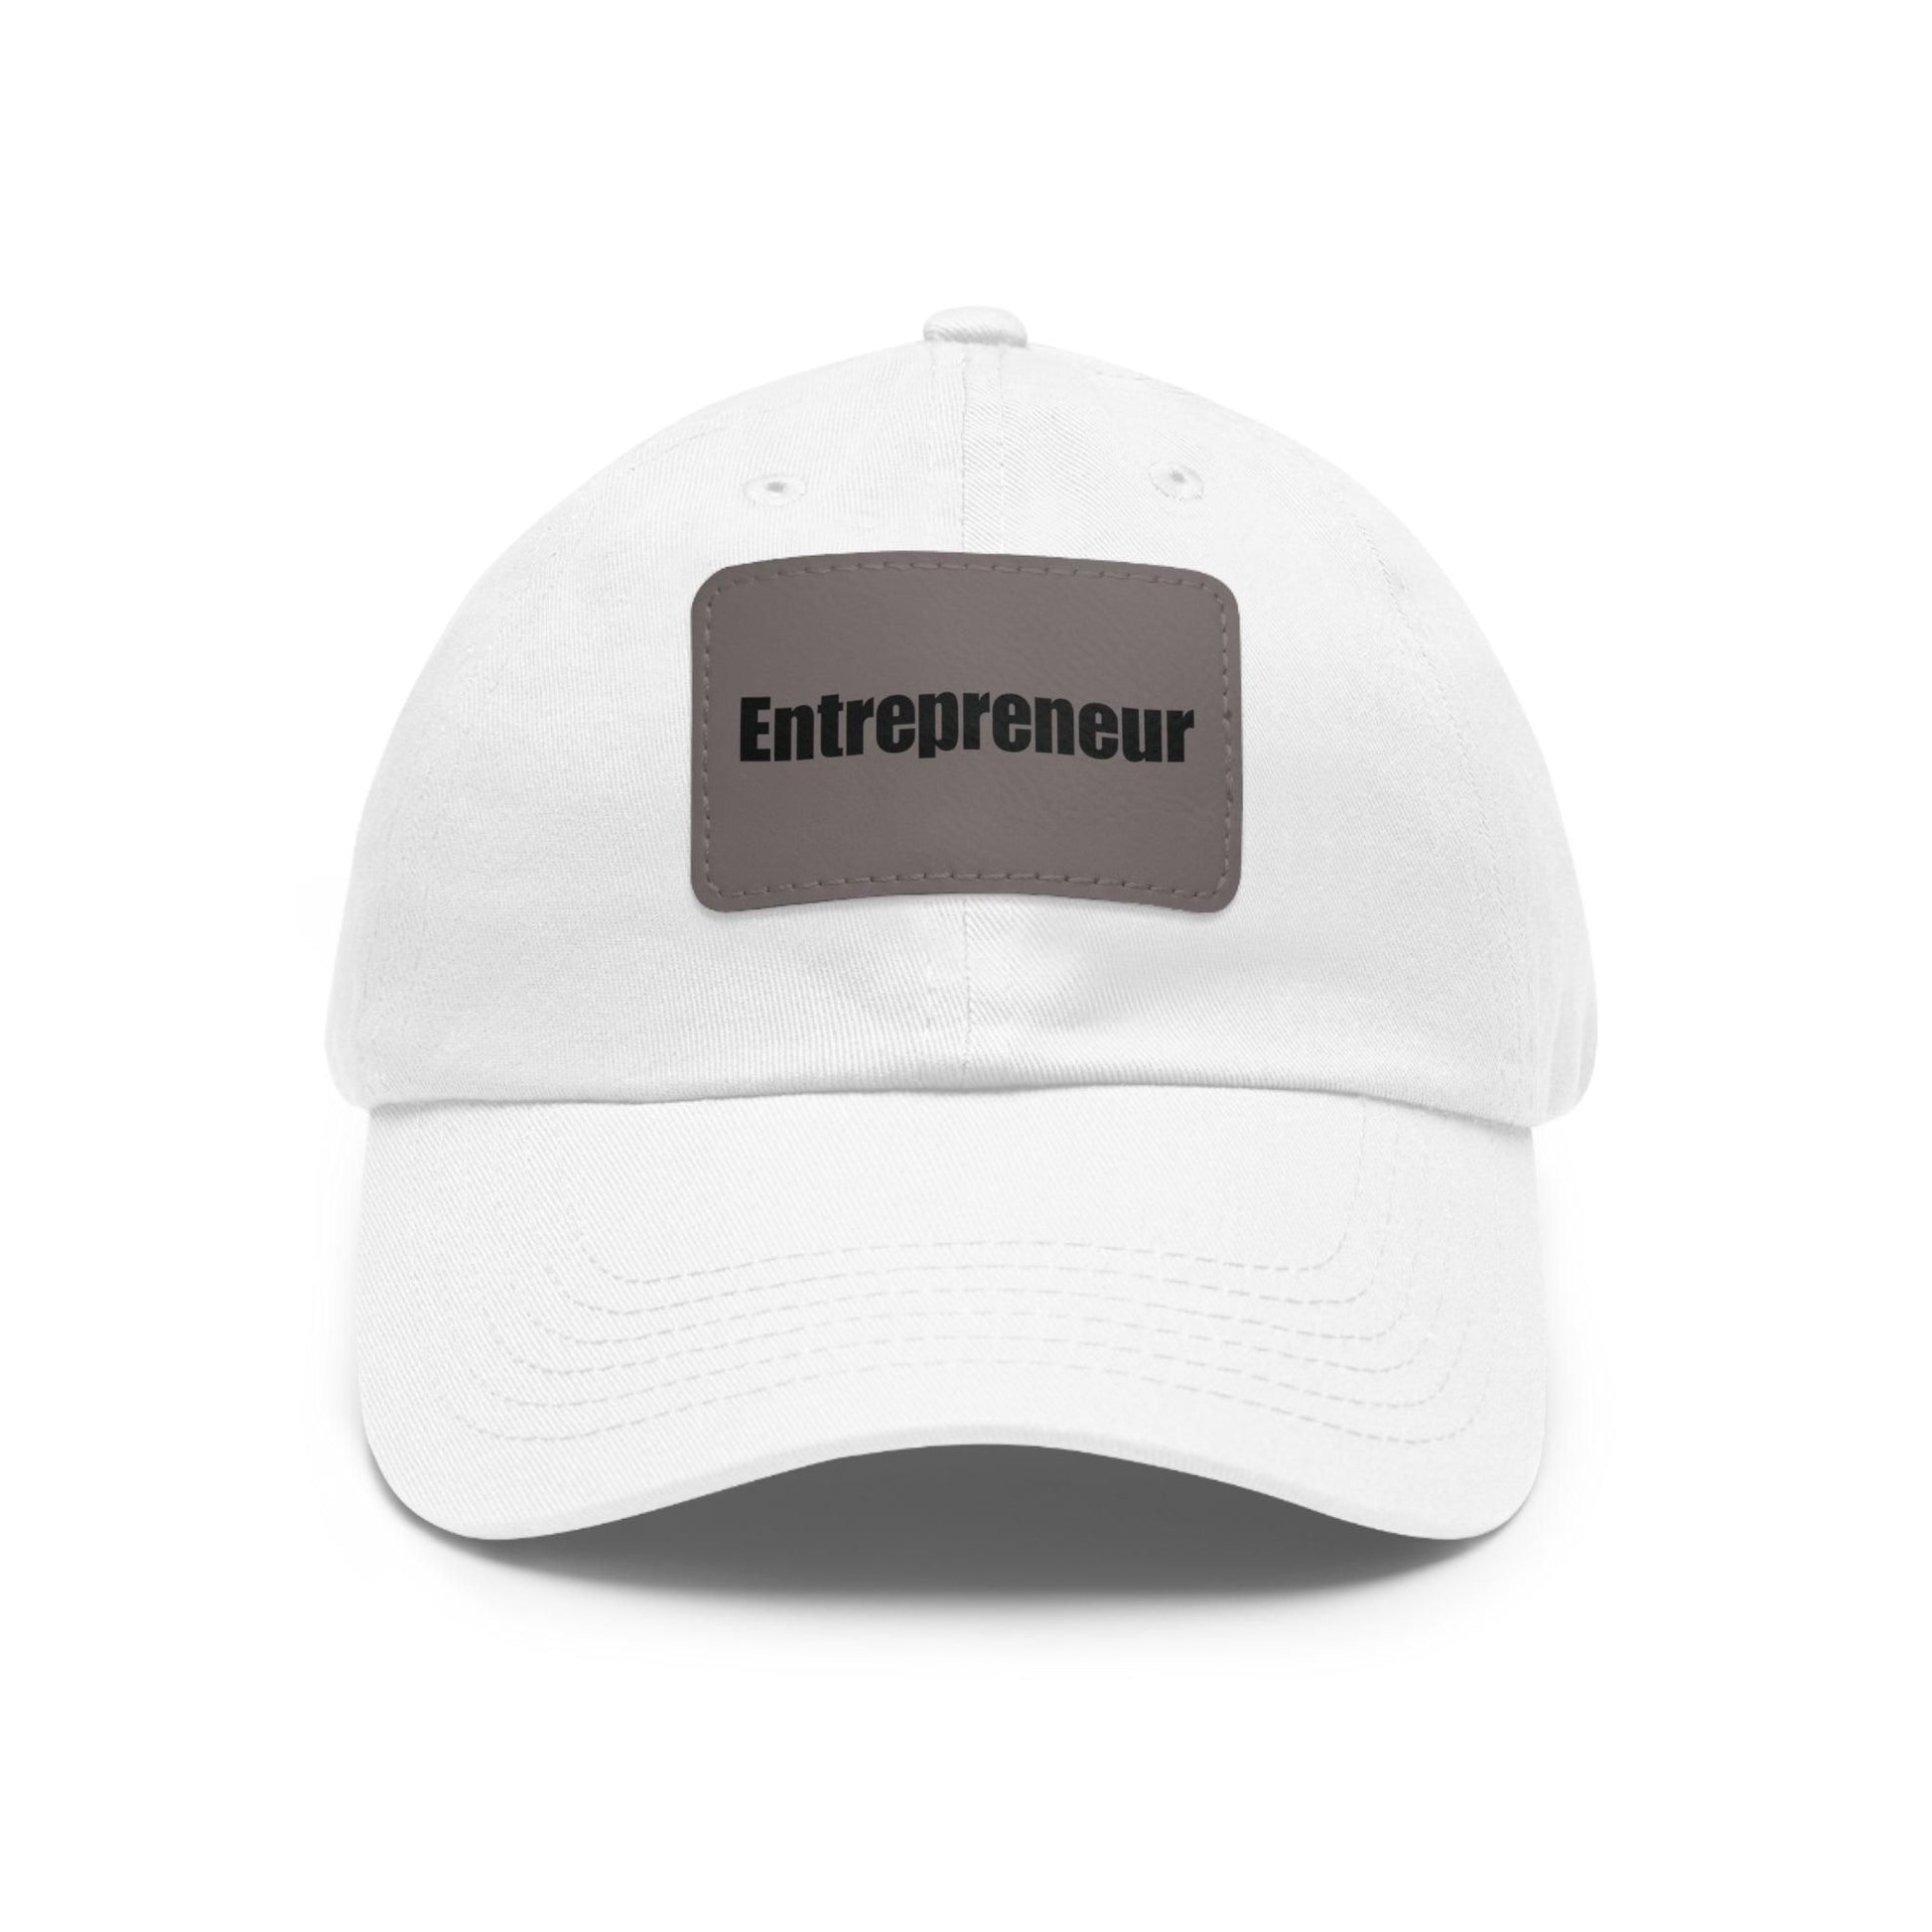 Entrepreneur Baseball Hat with Leather Patch Cap White / Grey patch Rectangle One size